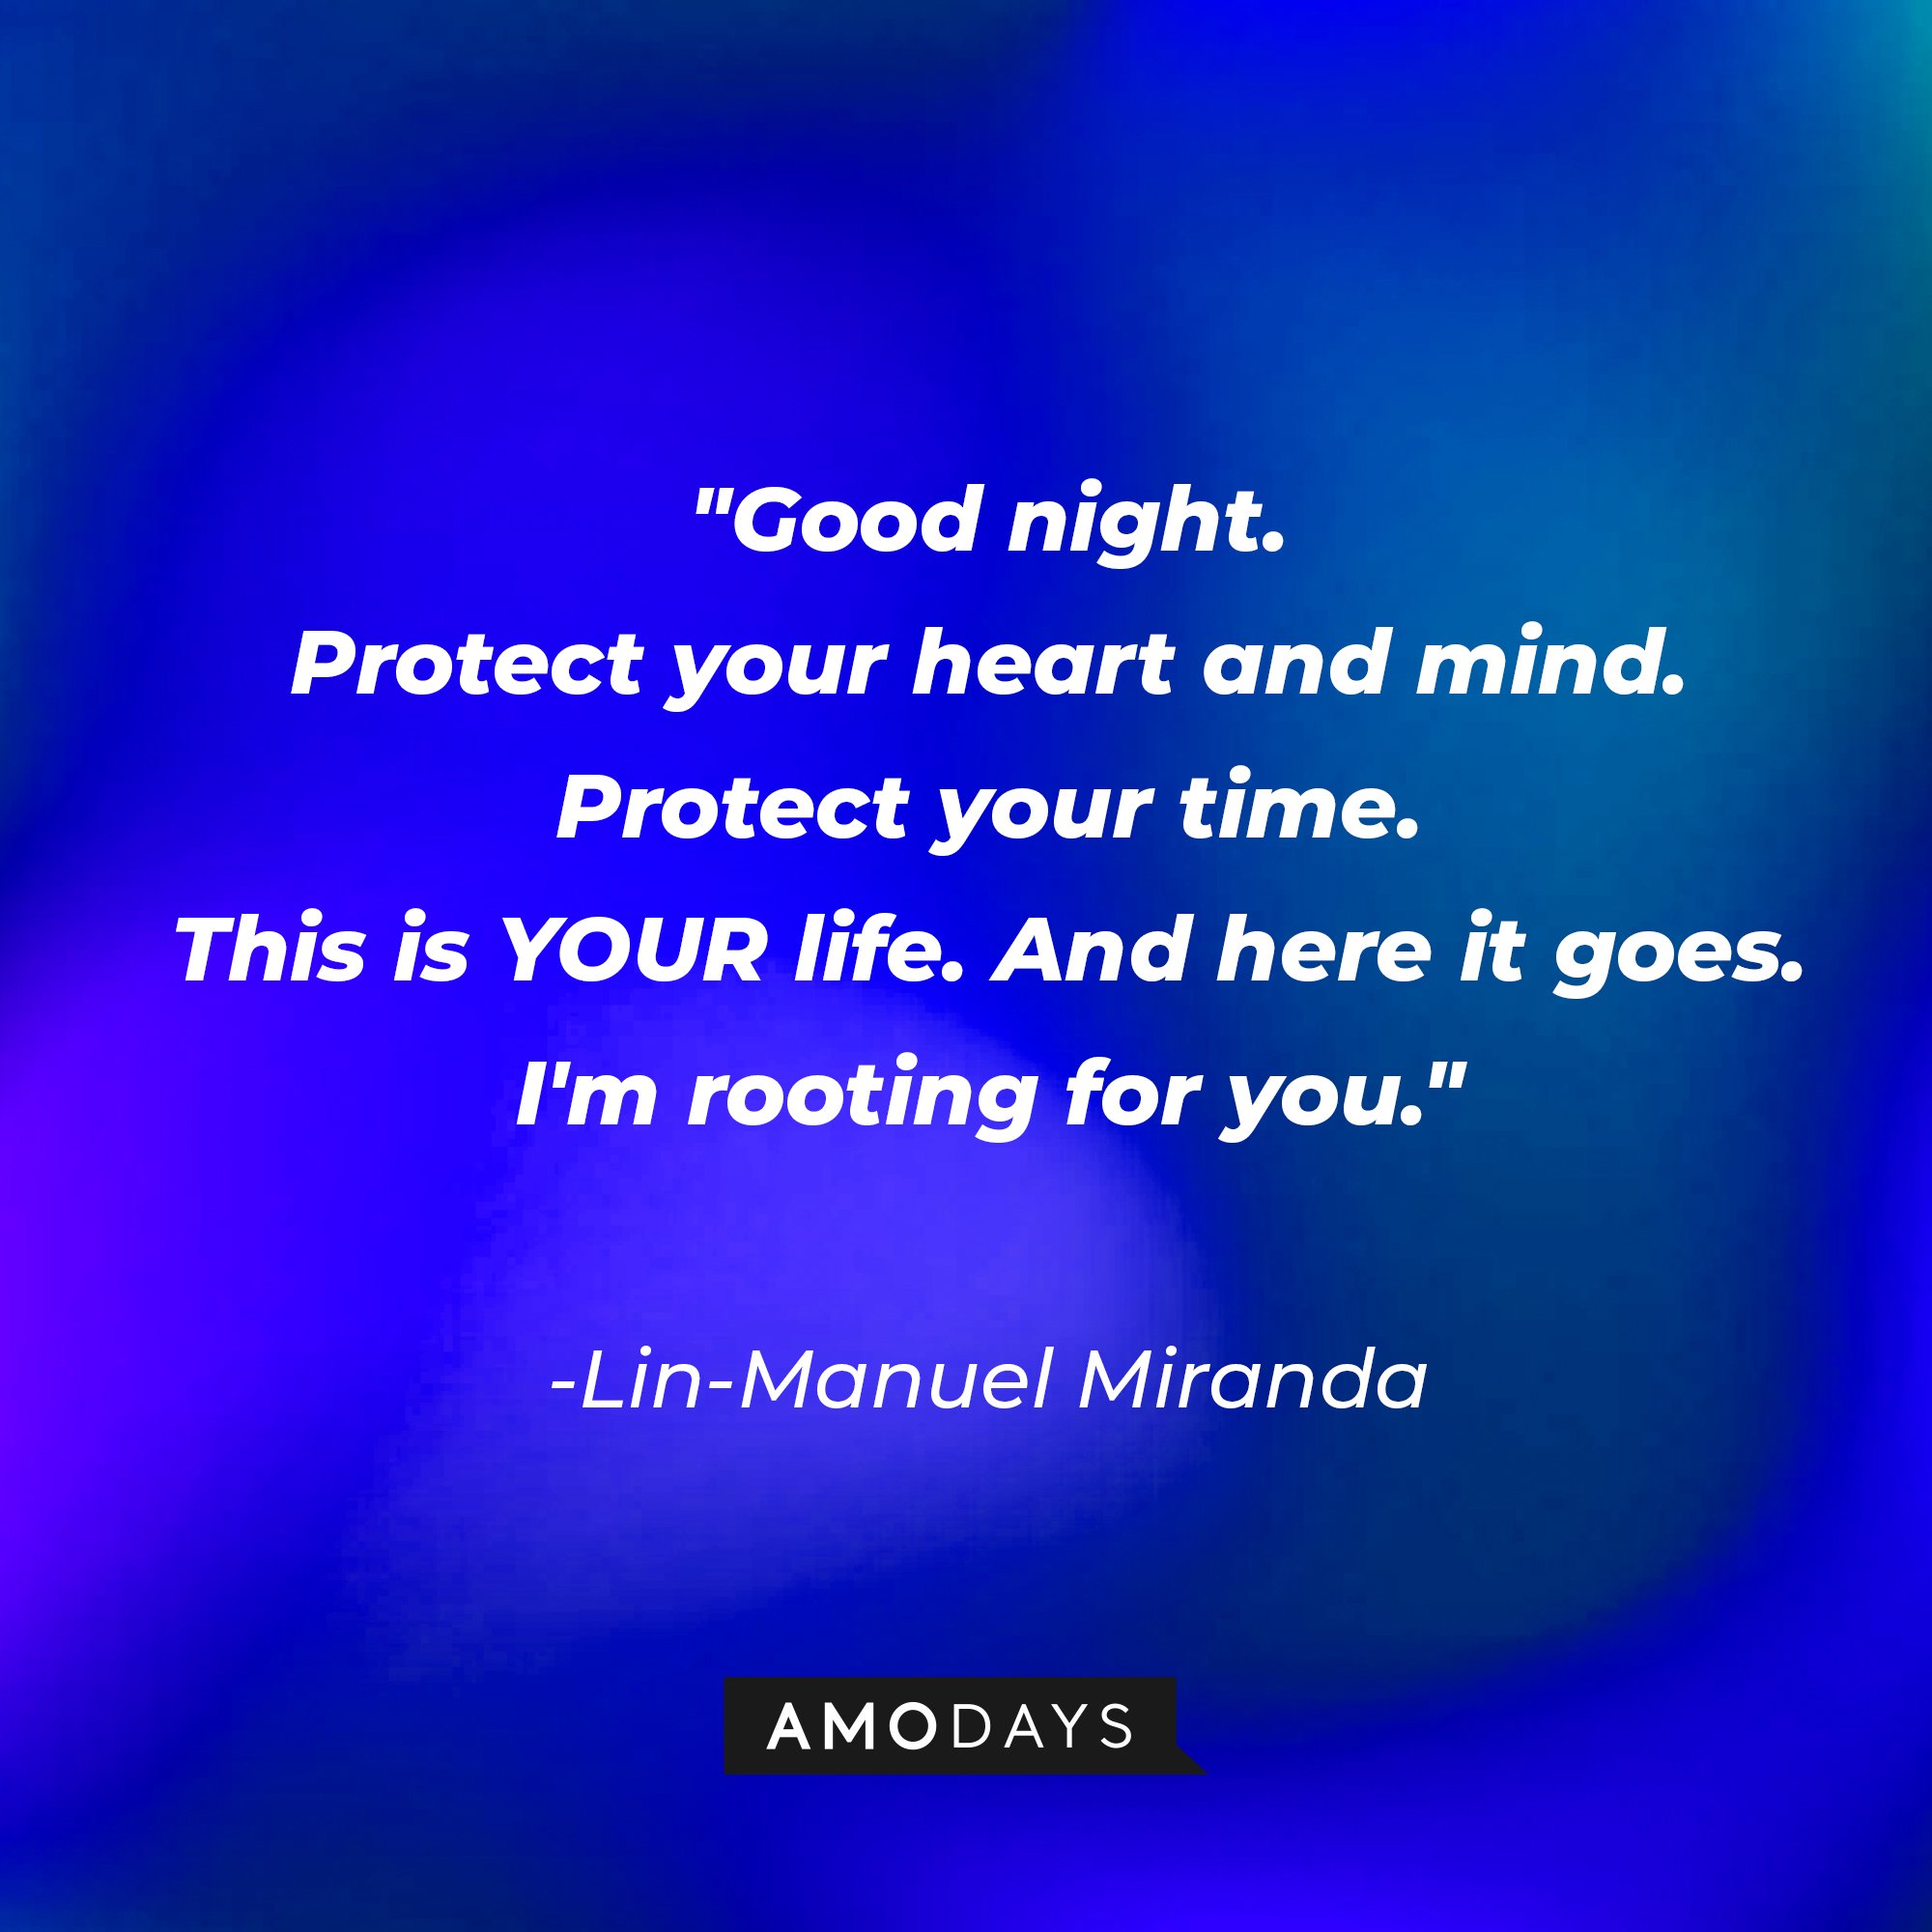 Lin-Manuel Miranda's quote: "Good night. / Protect your heart and mind. / Protect your time. / This is YOUR life. And here it goes. / I'm rooting for you." | Image: AmoDays